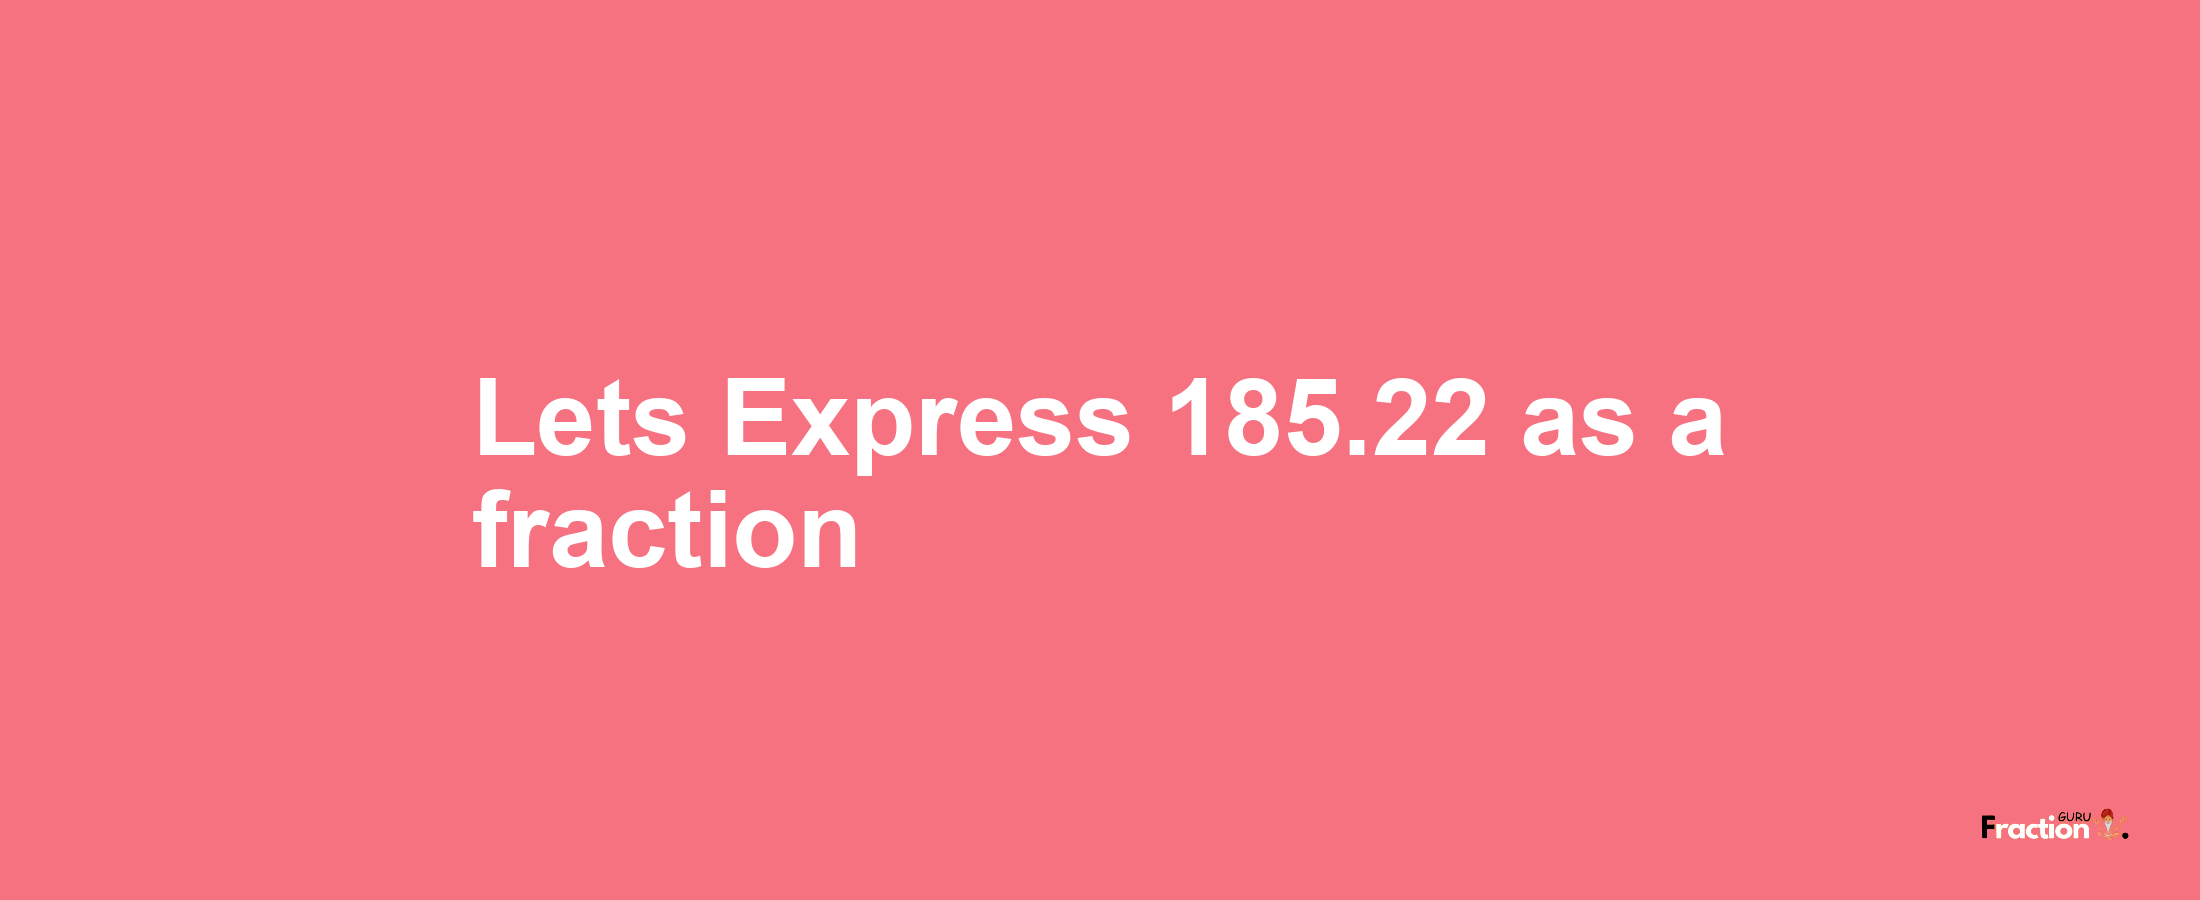 Lets Express 185.22 as afraction